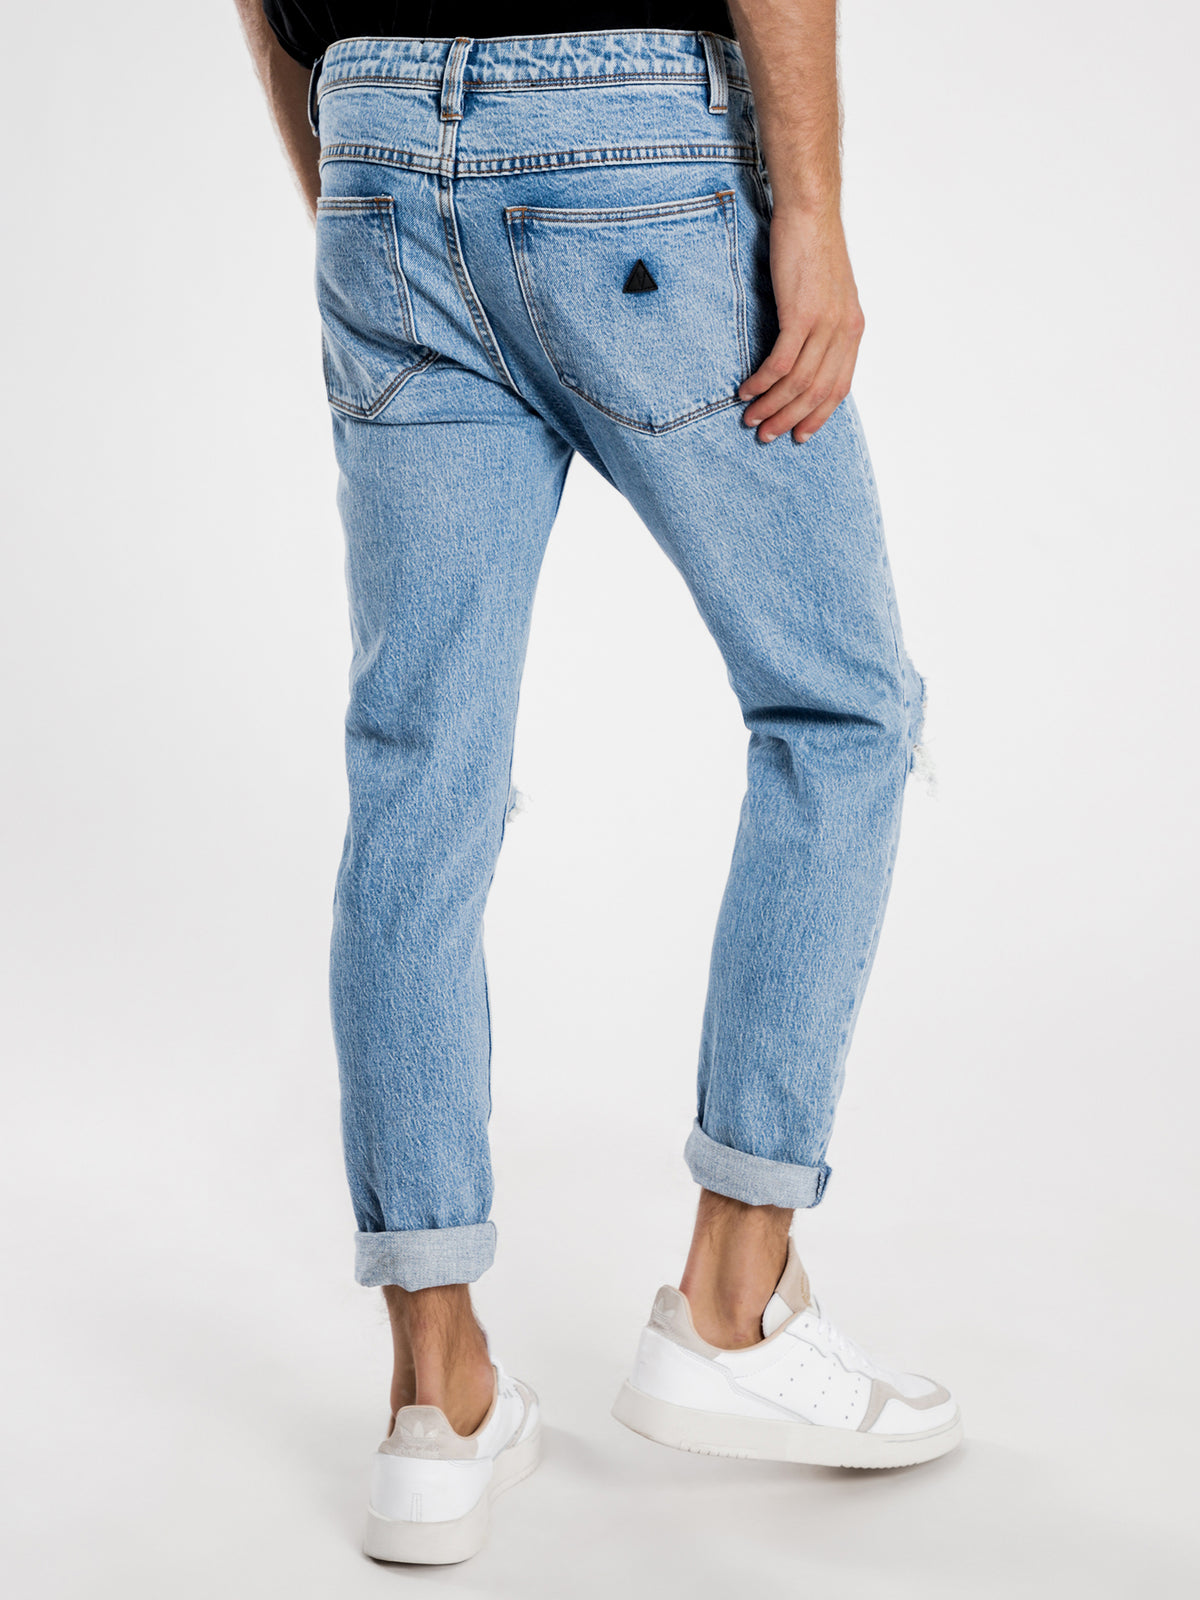 A Dropped Skinny Turn Up Jeans in Sketchy Blue Denim